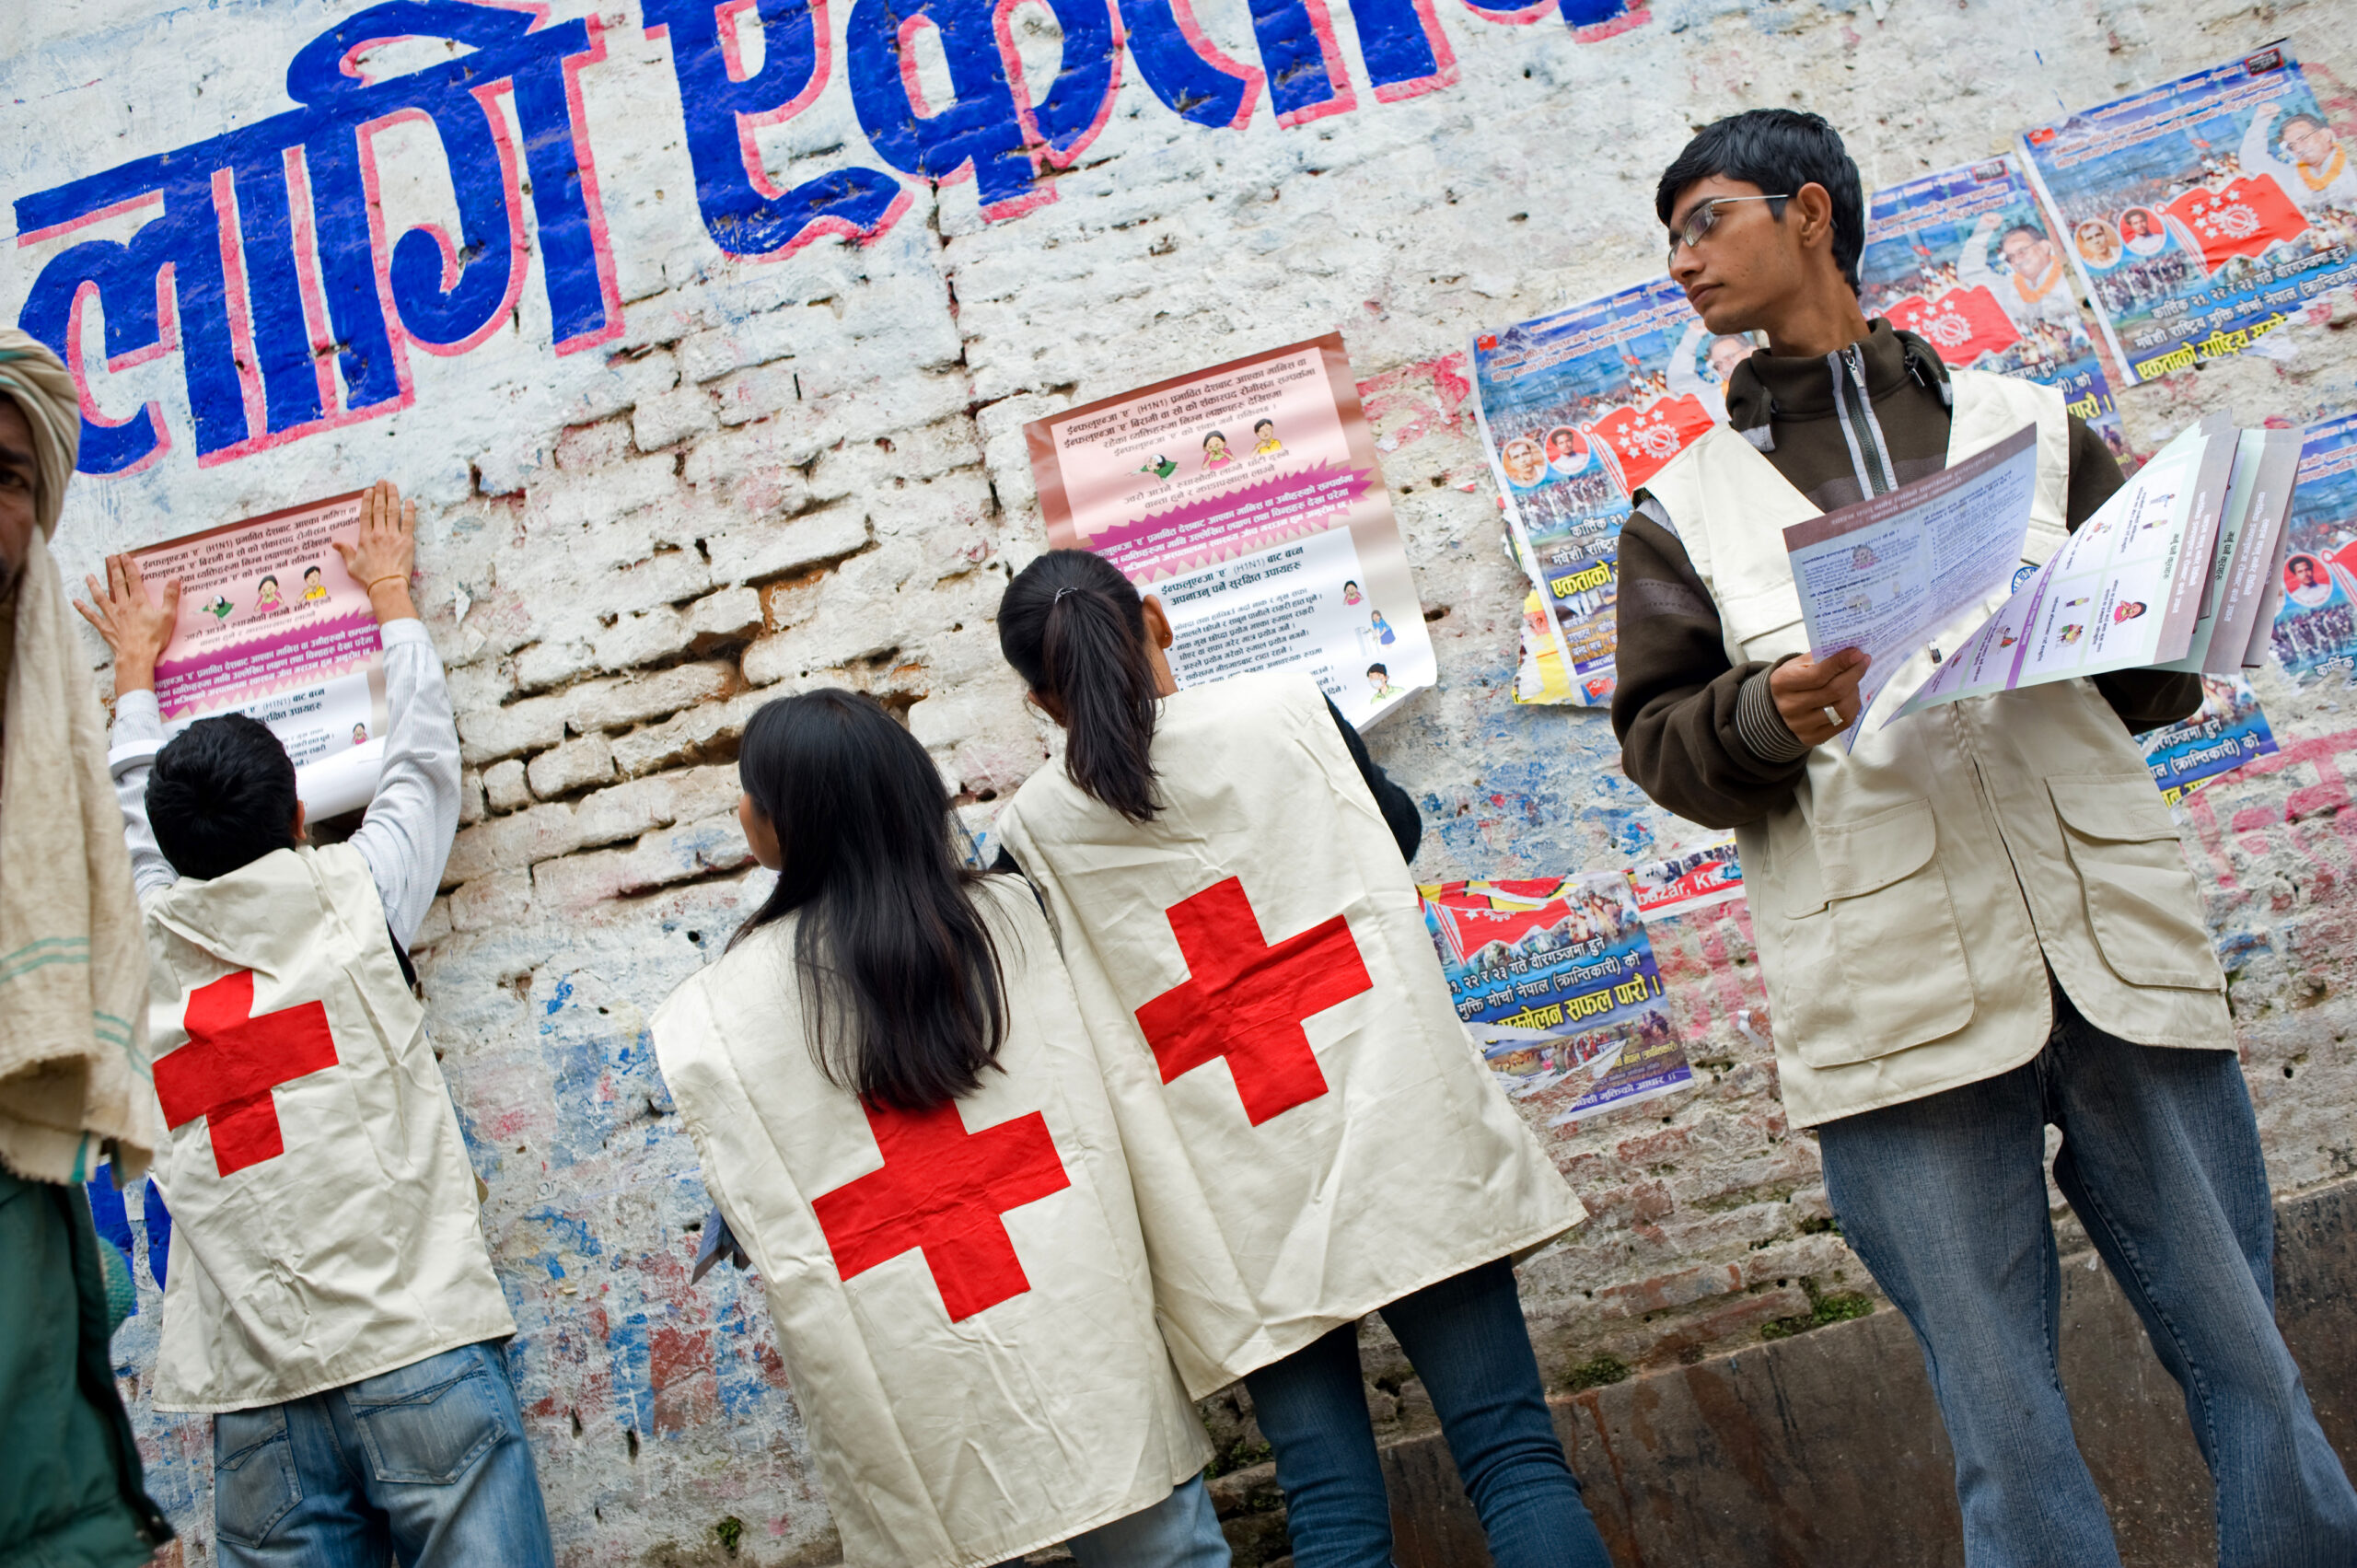 Image shows a group of volunteers distributing pape materials in a street, they glued posters to walls for pedestrians to have access to public health information.